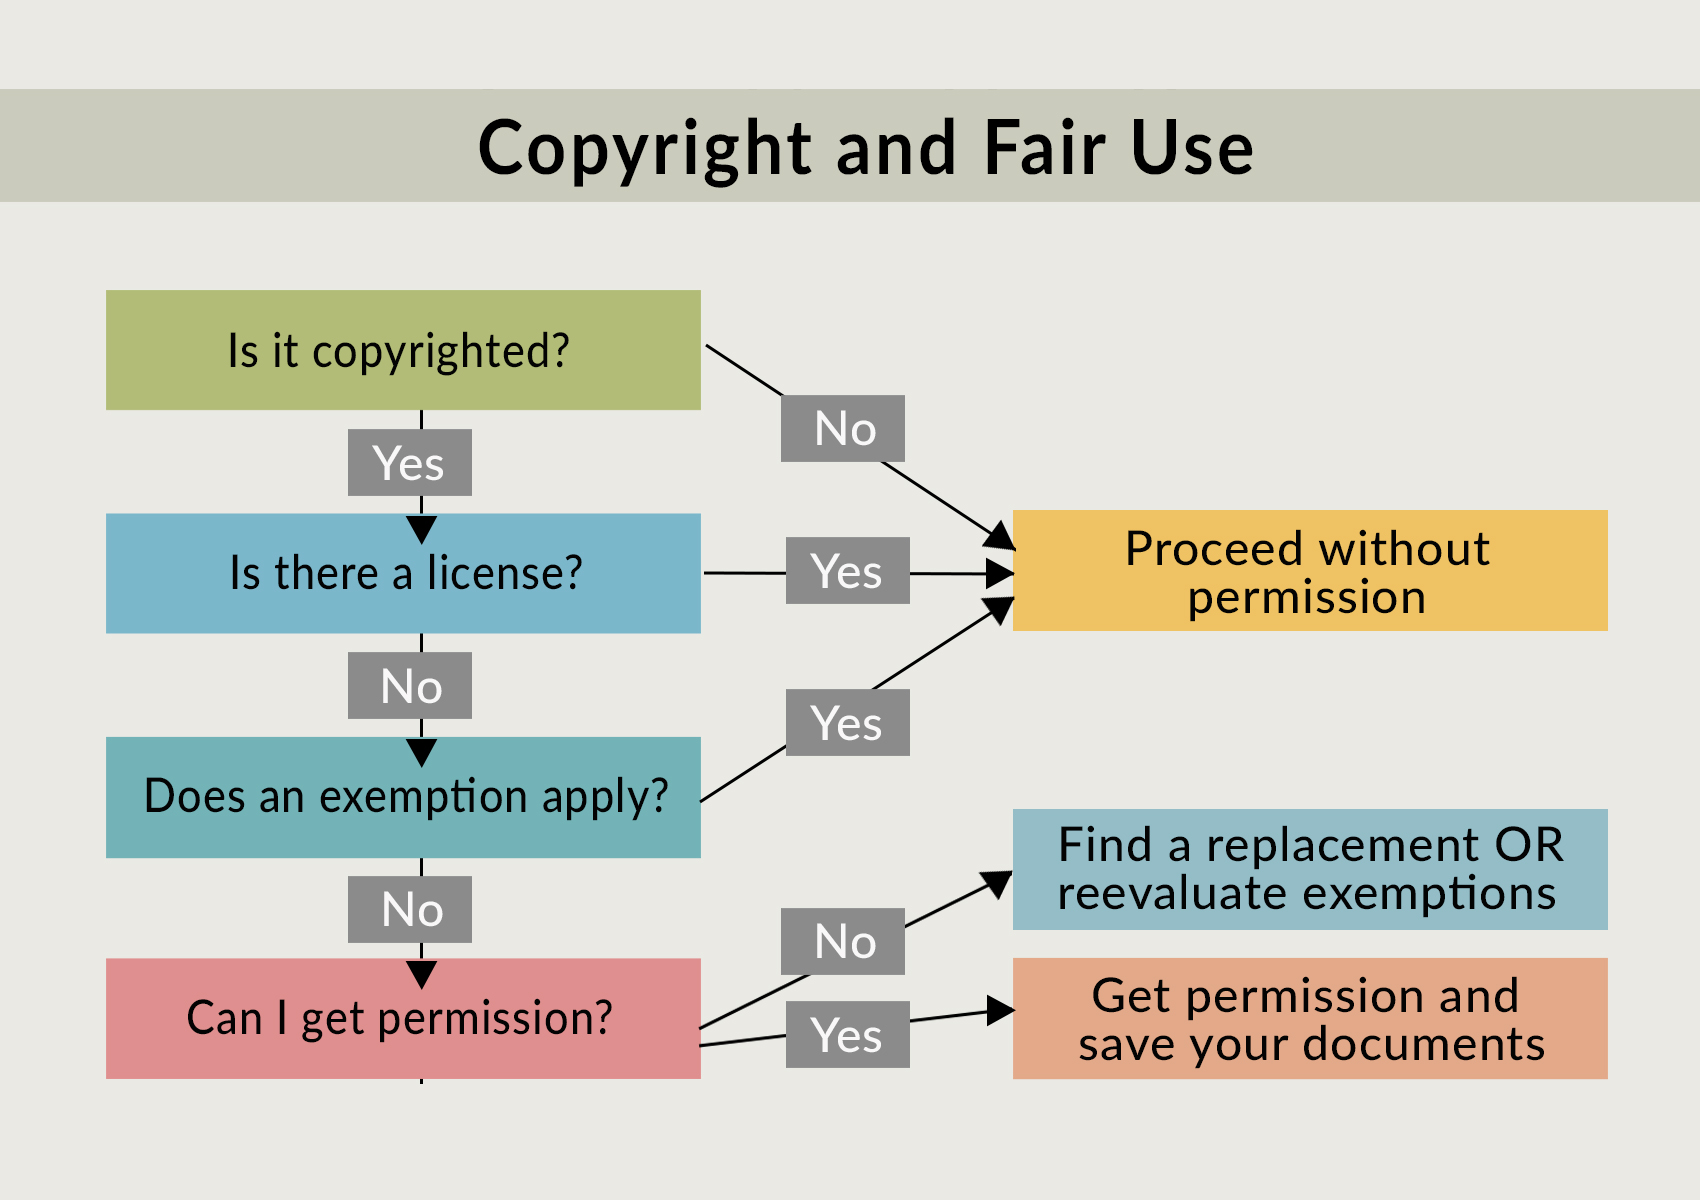 Copyright-and-use-questions.jpg